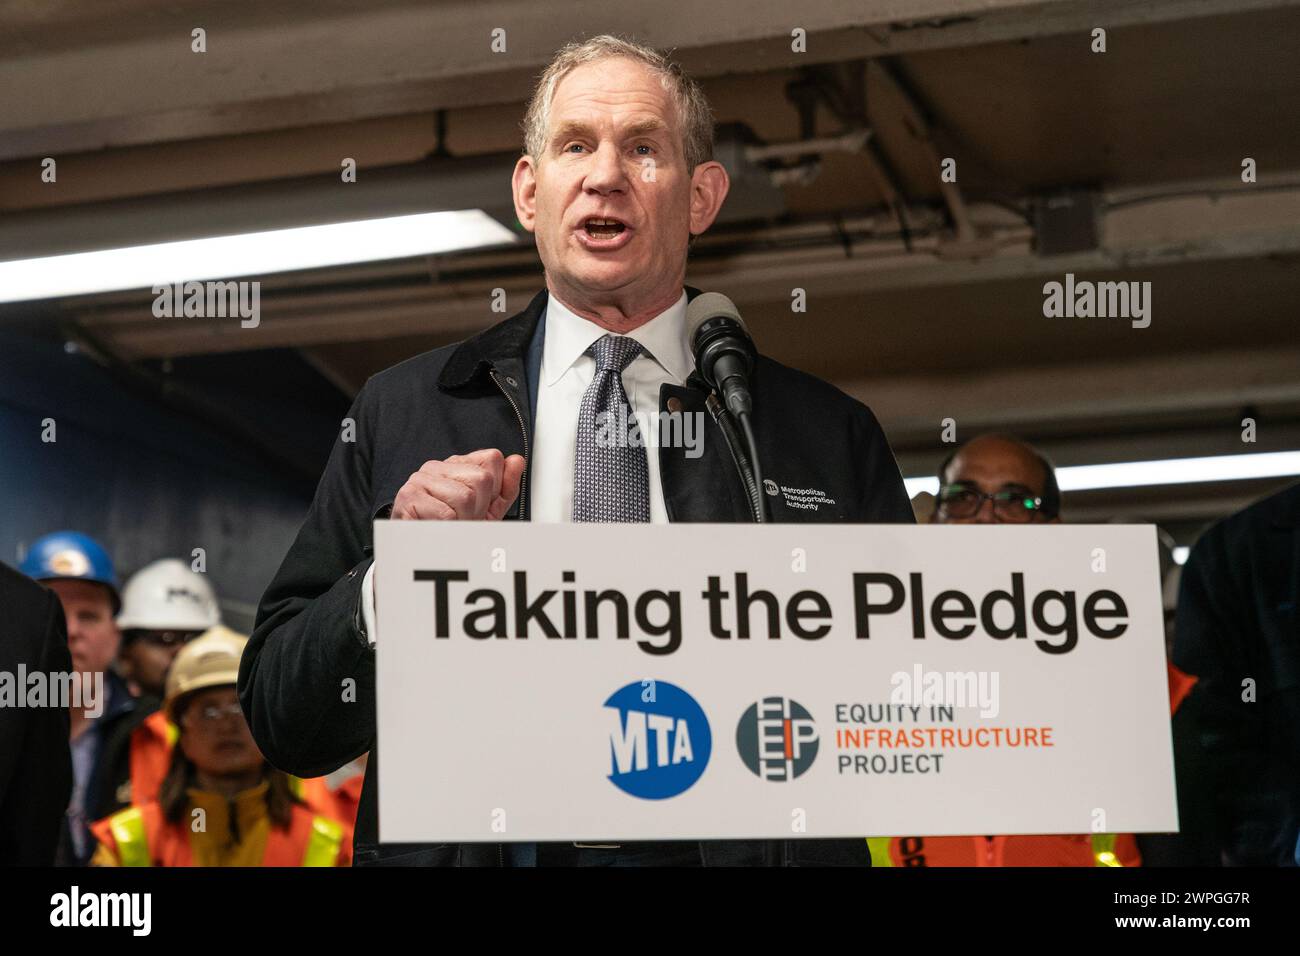 Janno Lieber, MTA Chair and CEO speaks during MTA announcement at 14th street subway station in New York on March 7, 2024. Dorval Carter Jr., Chicago Transit Authority President and Equity in Infrastructure Project Co-Chair, John Porcari, Equity in Infrastructure Project Co-Founder and Former U.S. Deputy Secretary of Transportation, Phillip Washington, Denver International Airport CEO and Equity in Infrastructure Project Chair, Janno Lieber, MTA Chair and CEO signed a pledge to promote minorities and women owned business to receive contracts to work on infrastructure projects for public transp Stock Photo